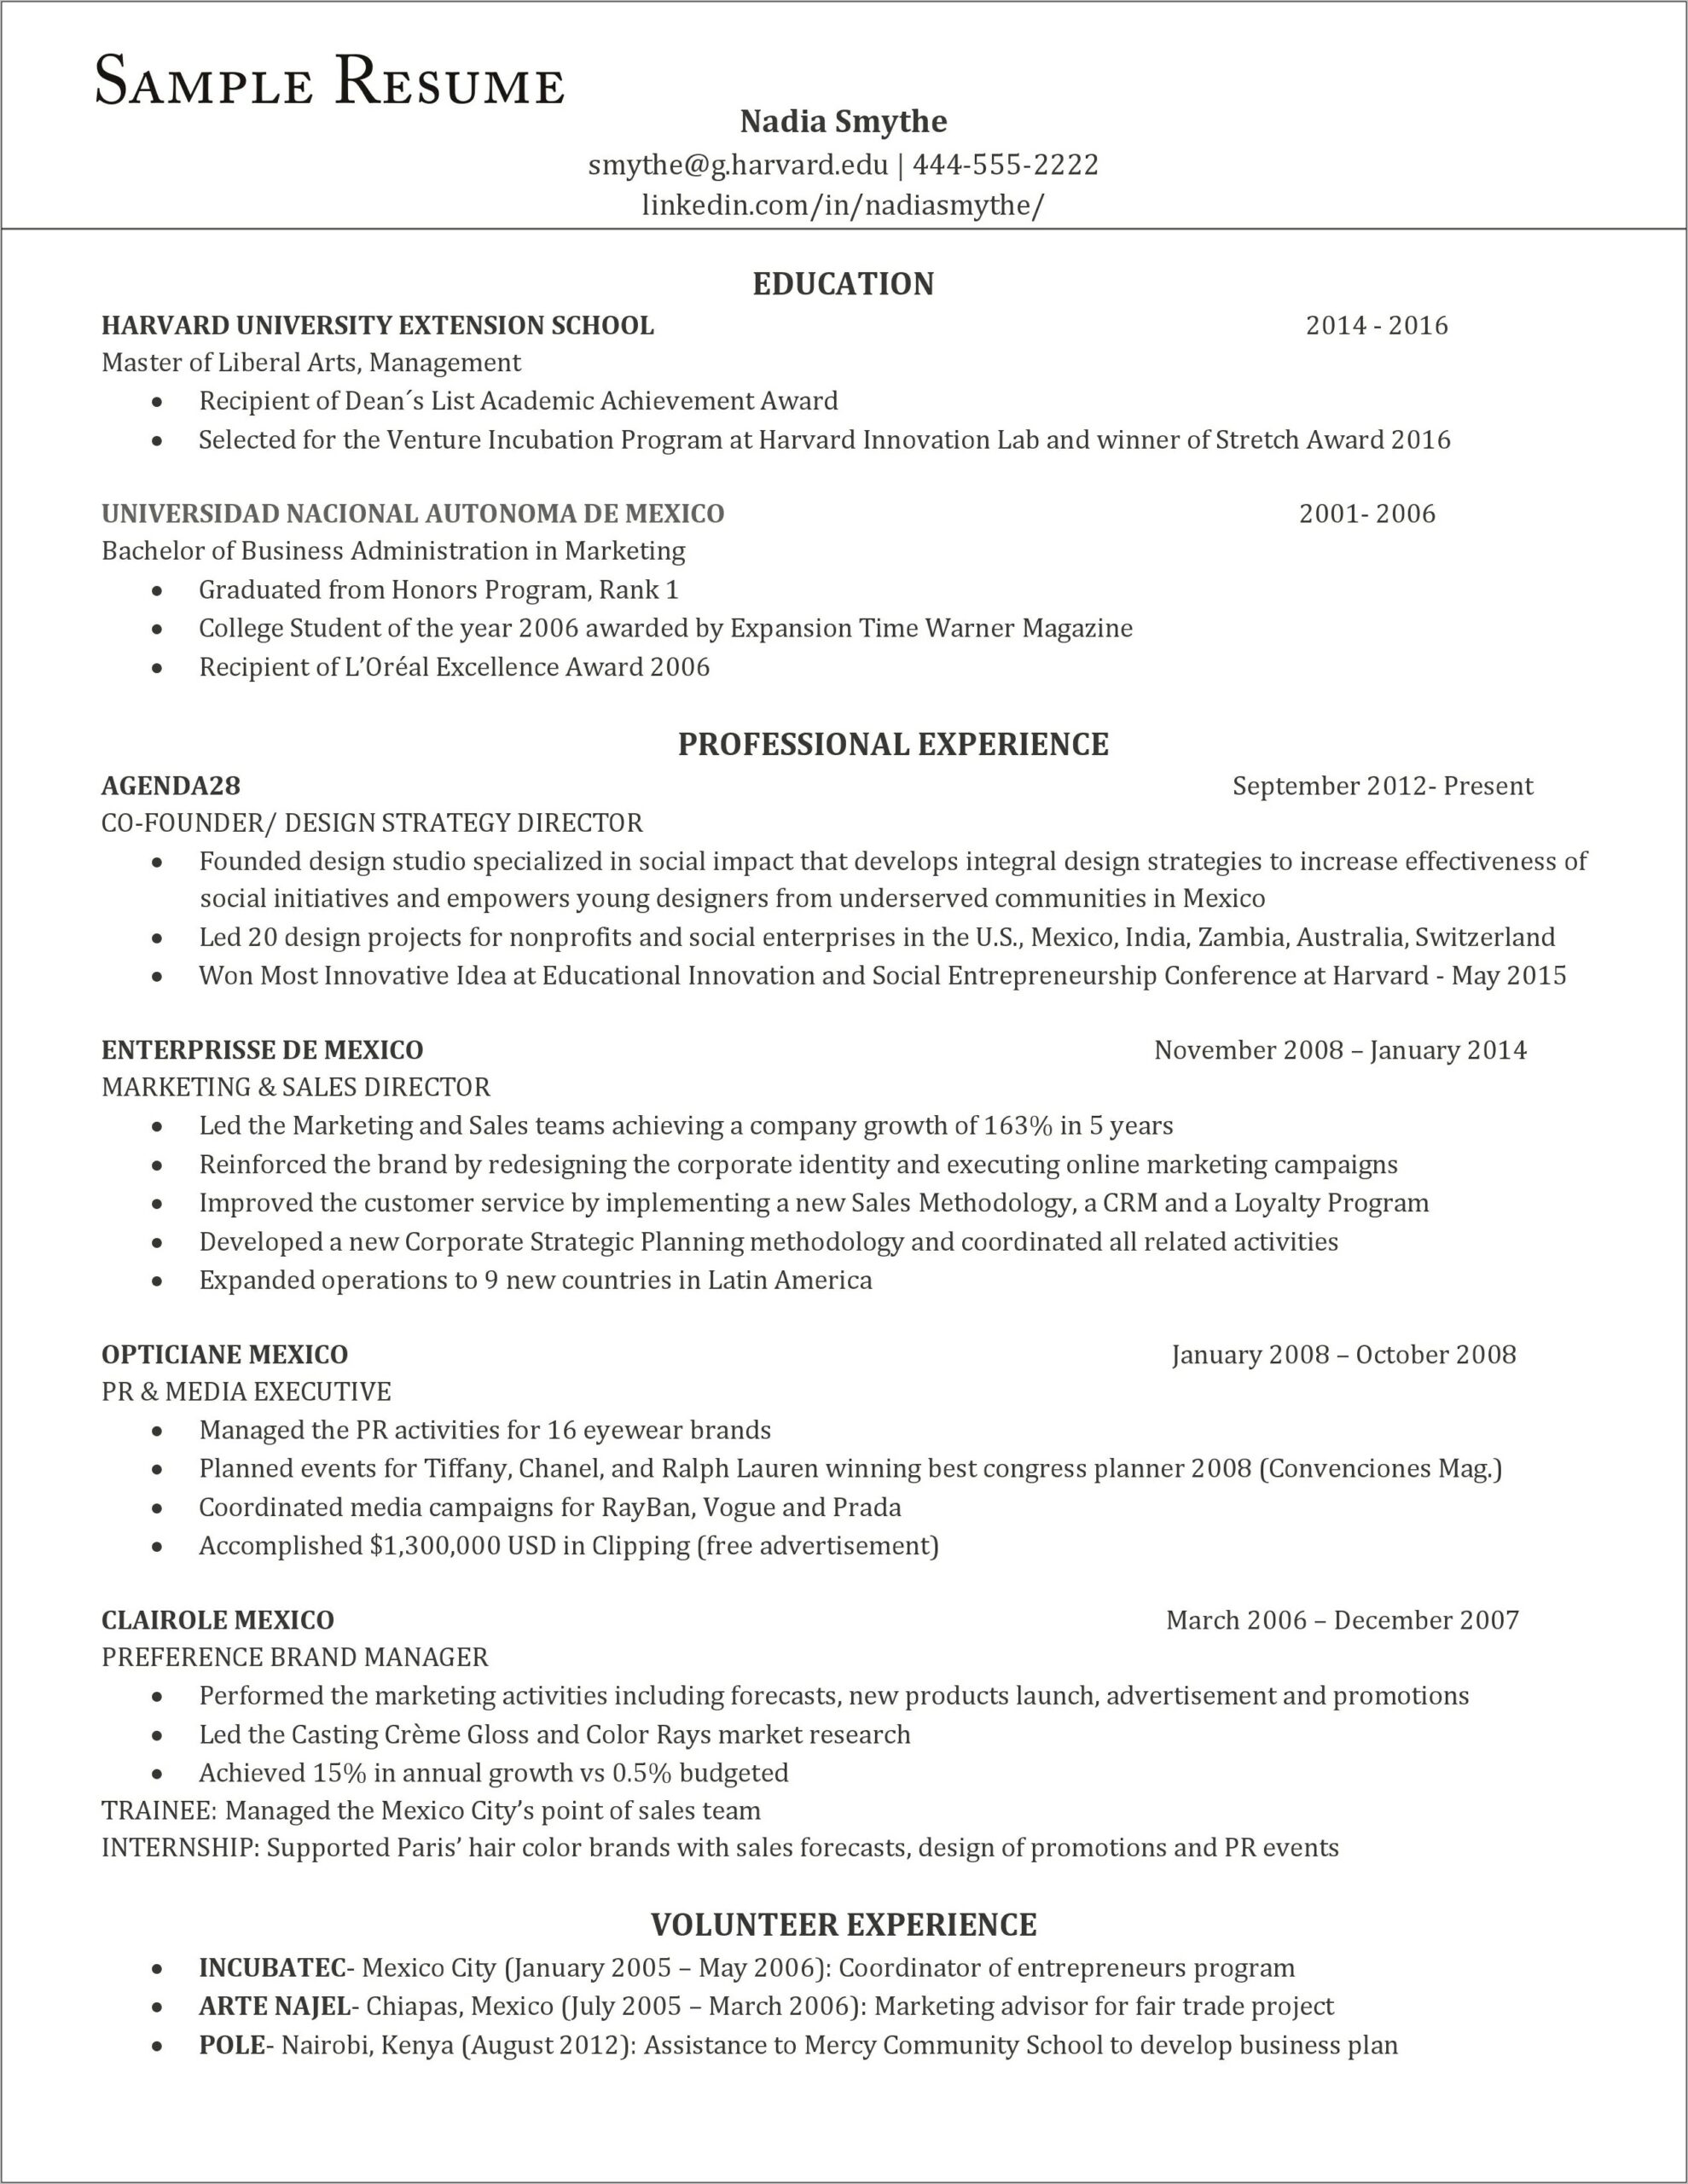 Post College Resume Template To Apply For Job